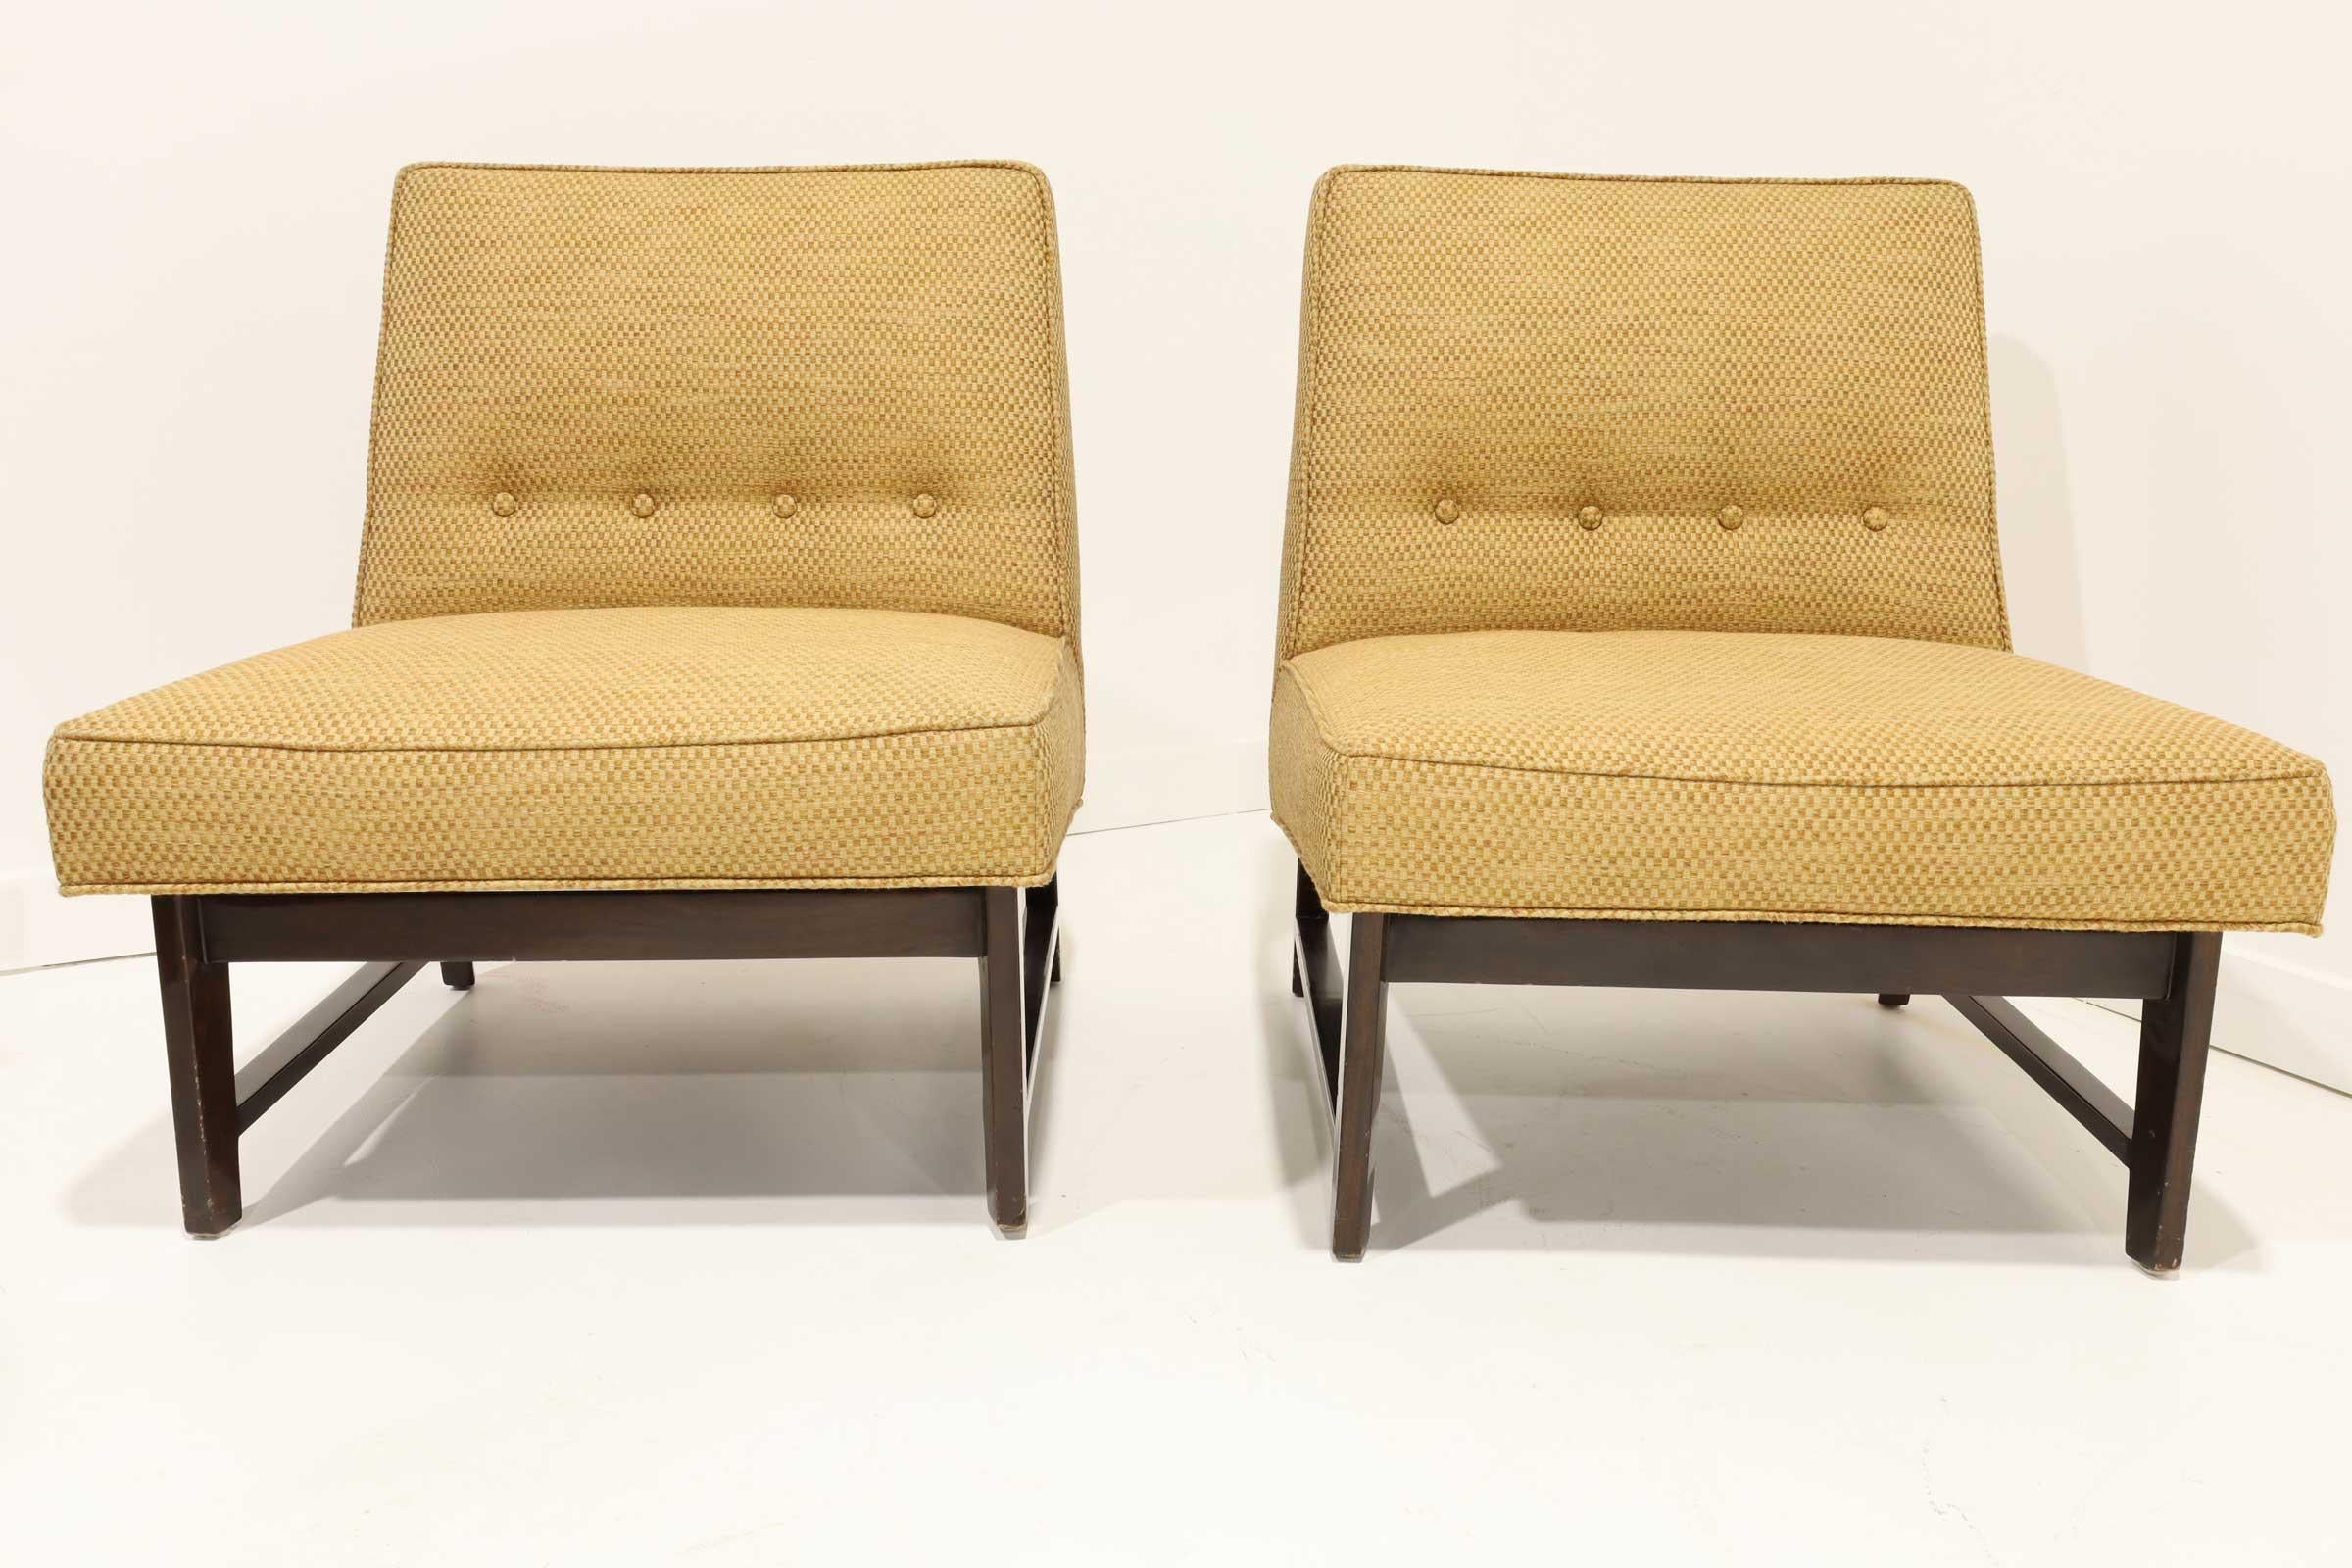 North American Pair of Edward Wormley for Dunbar Slipper Chairs in Gold Color Upholstery